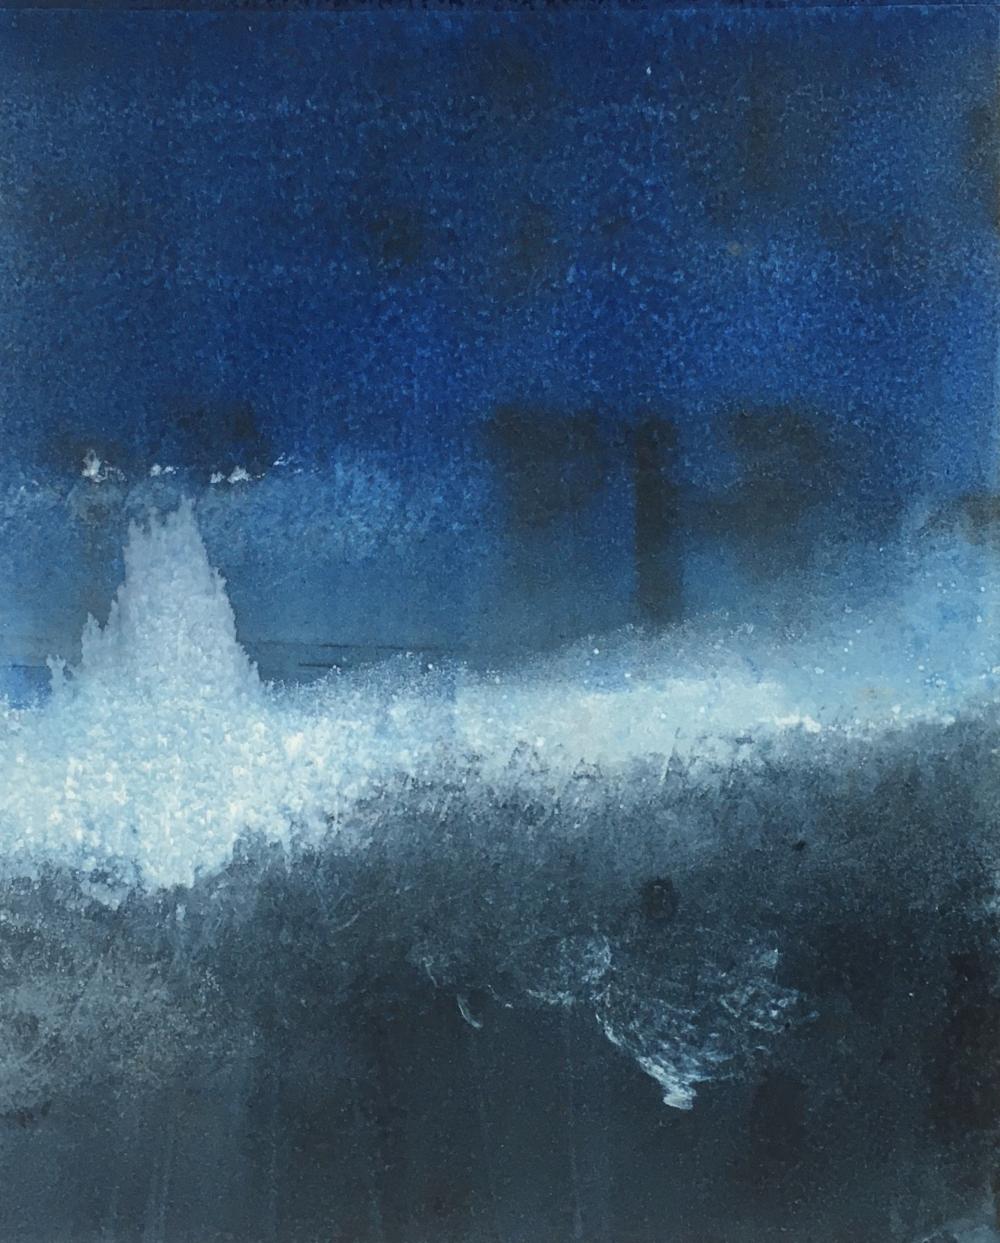 A blue landscape with waves at night